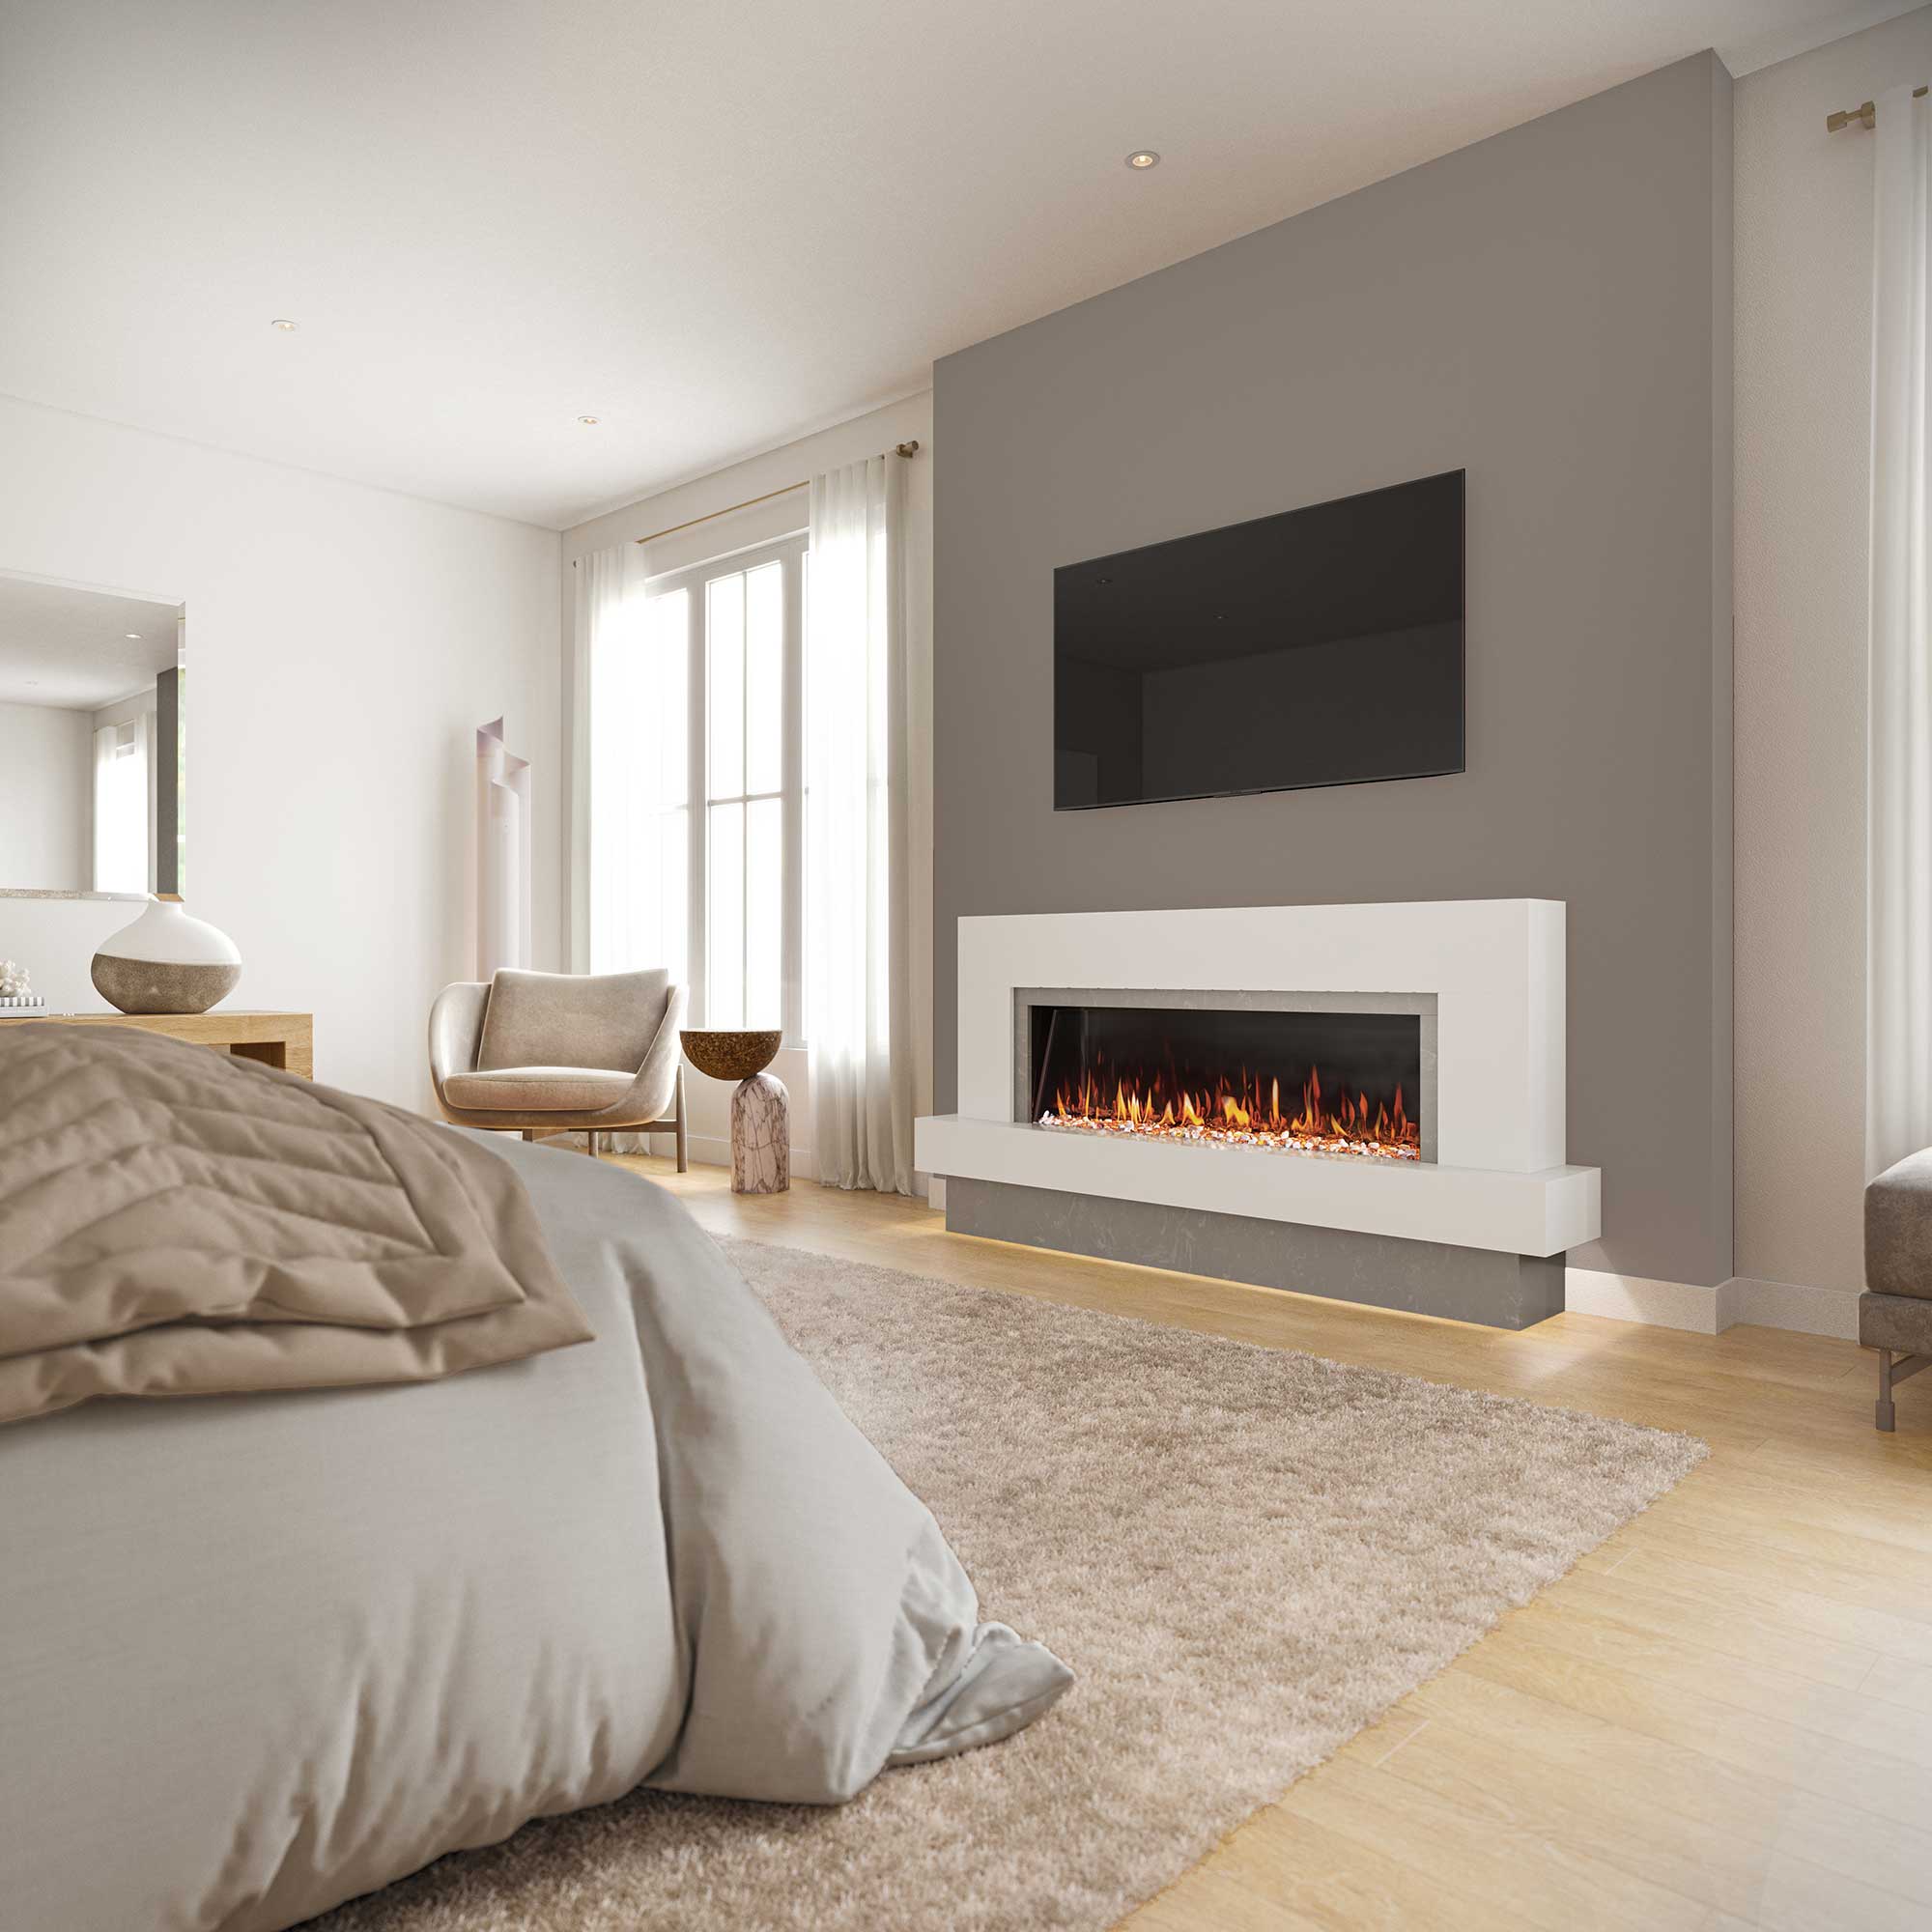 how big of a room will an electric fireplace heat?